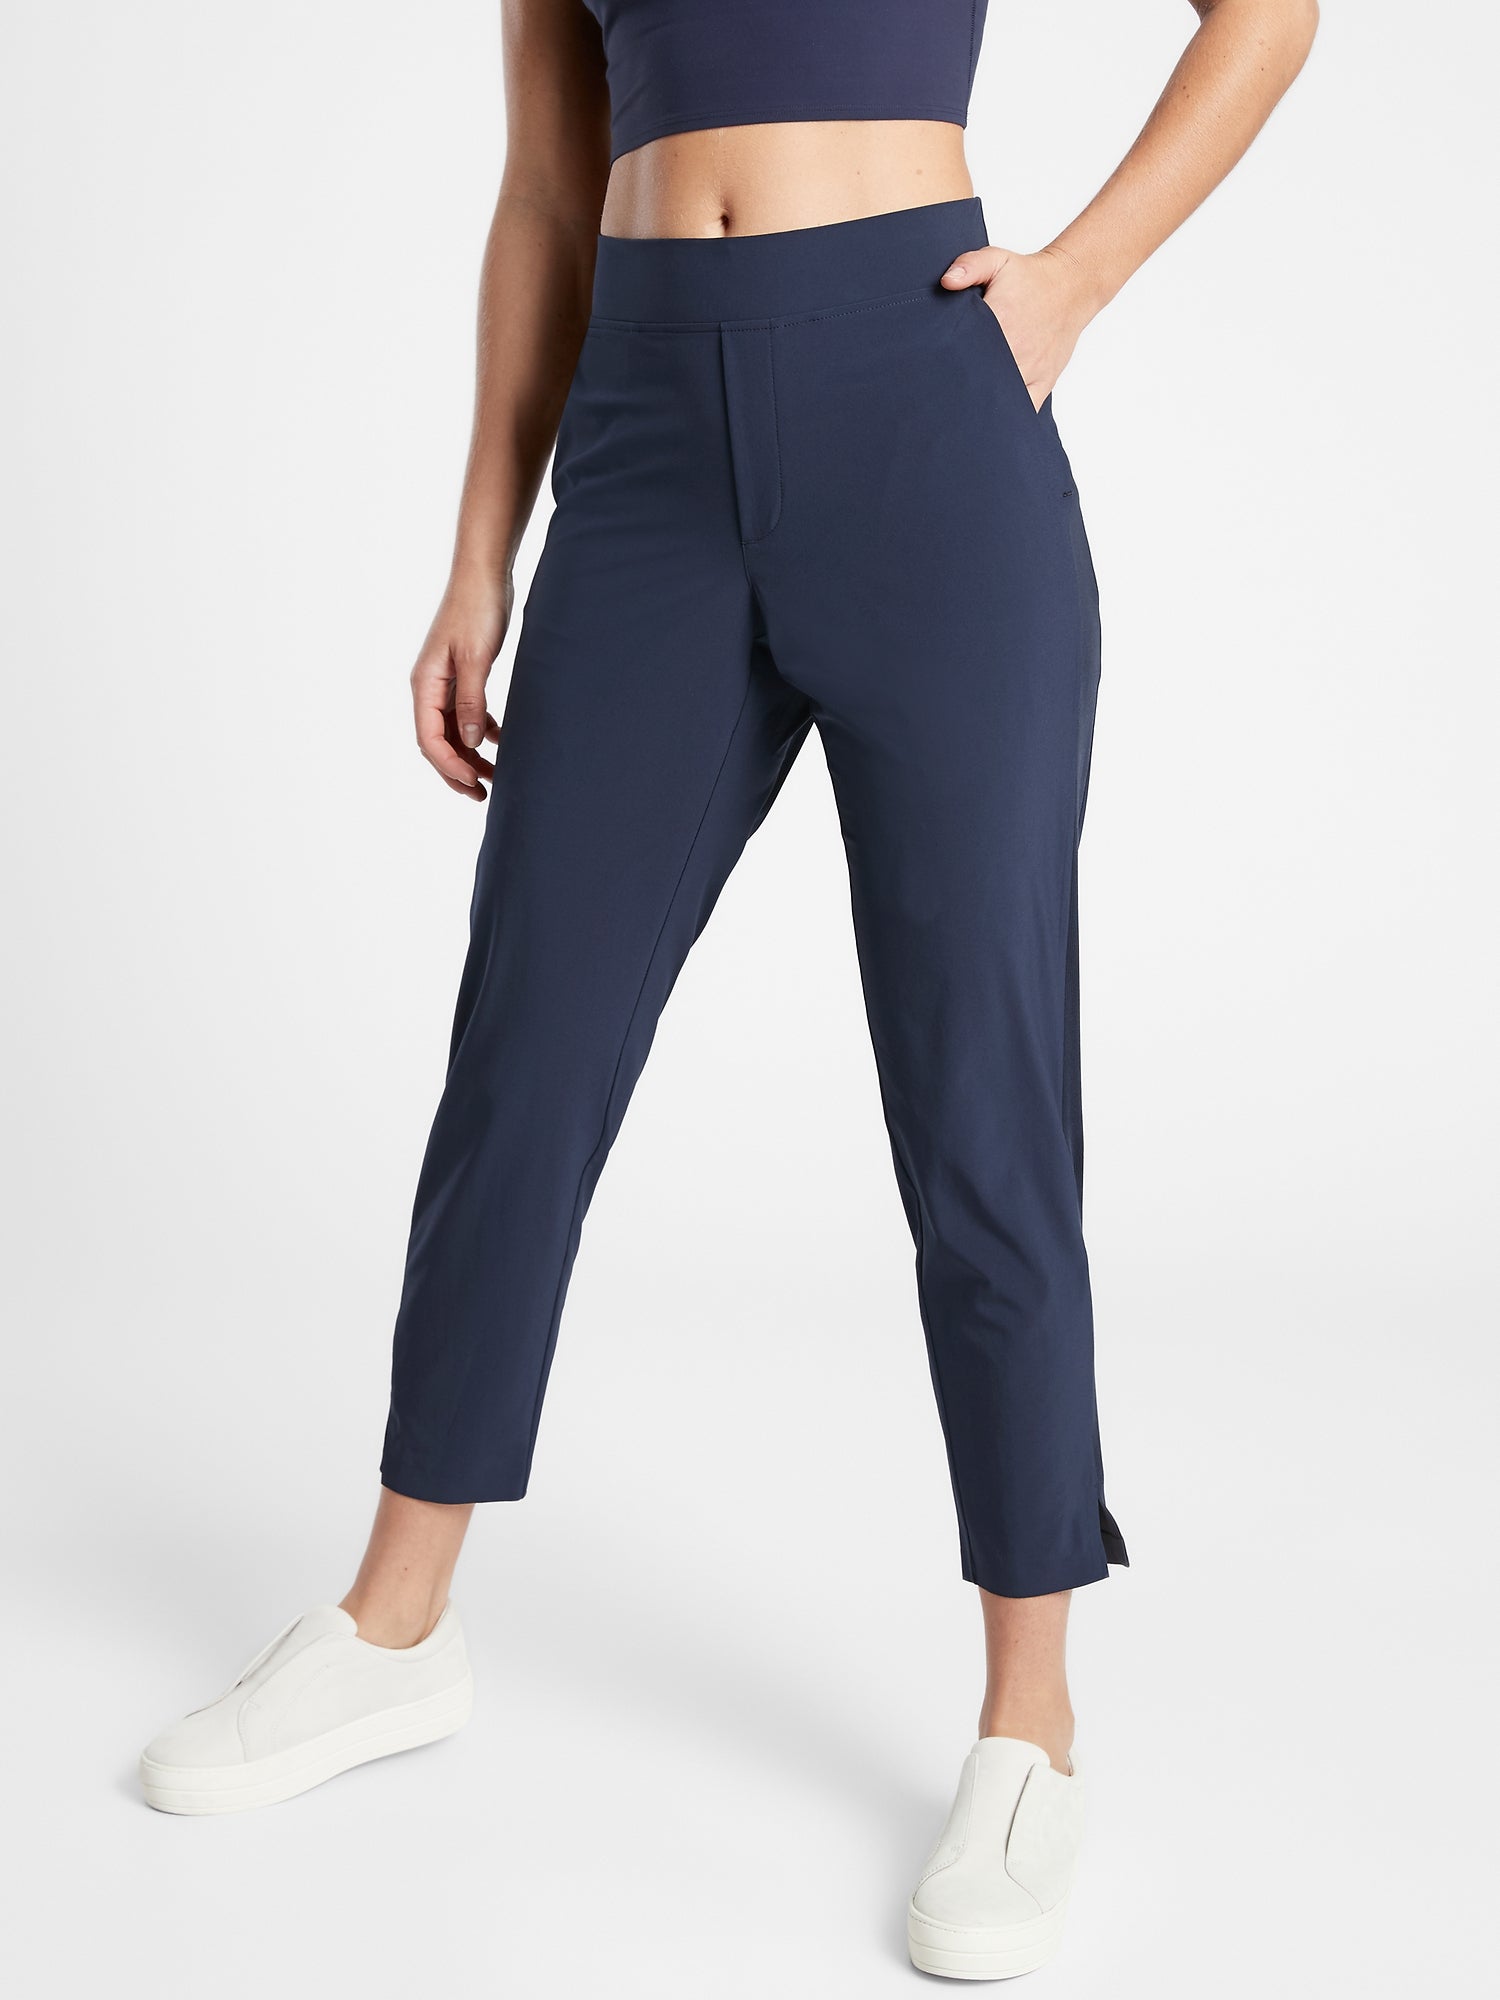 These Athleta Pants Are Perfect for Getting Back Out There  Who What Wear